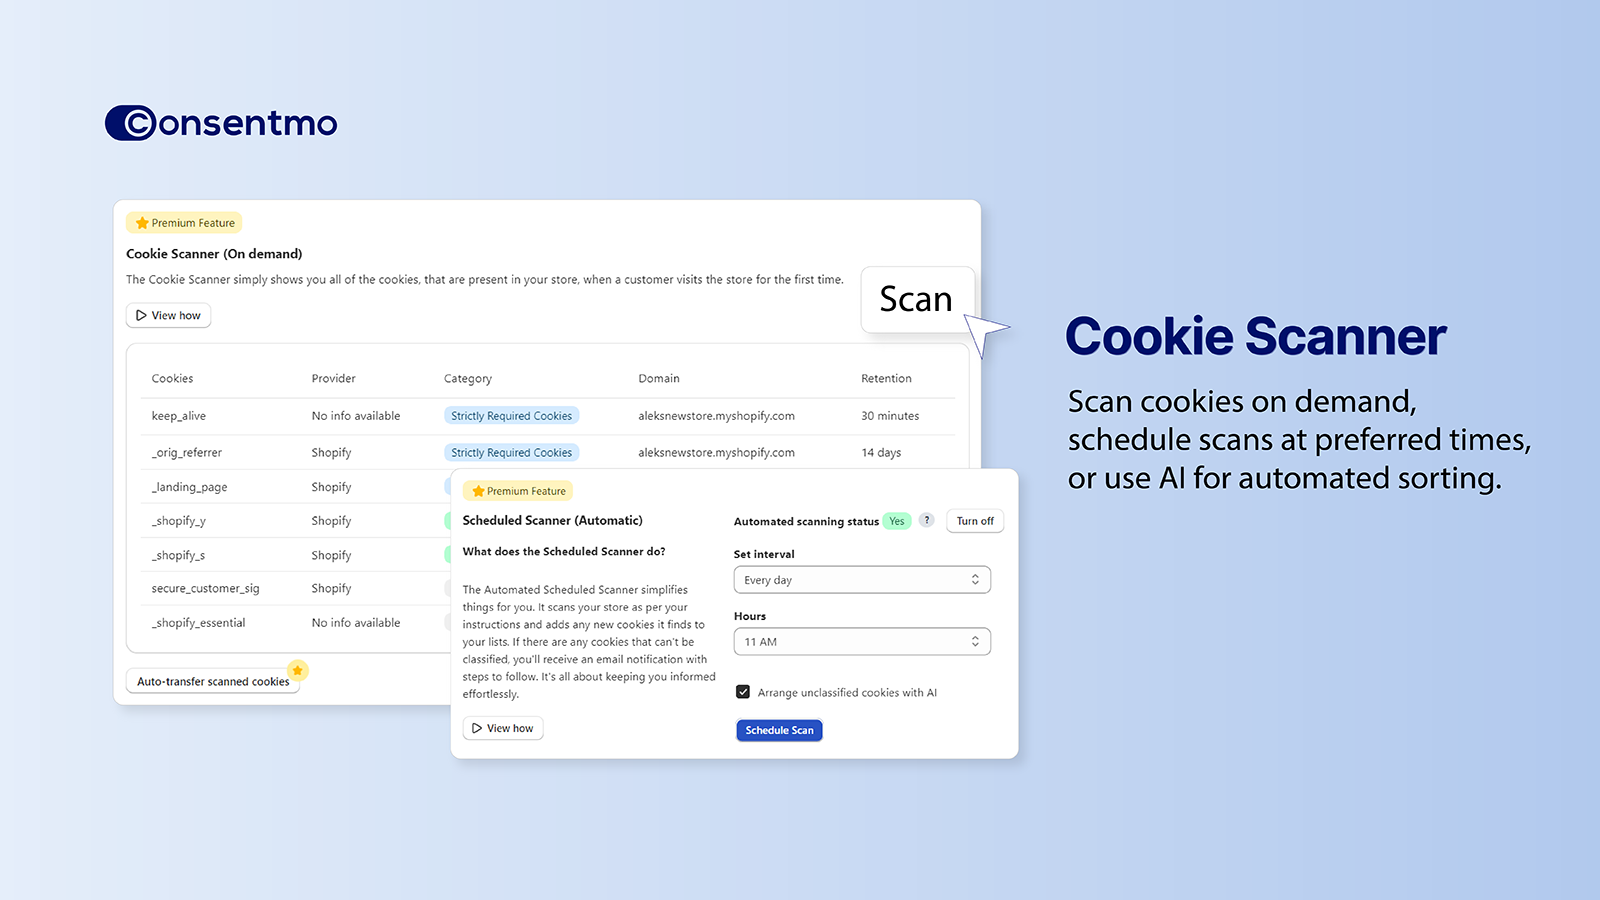 Cookie Scanner for securing Compliance and Transparency